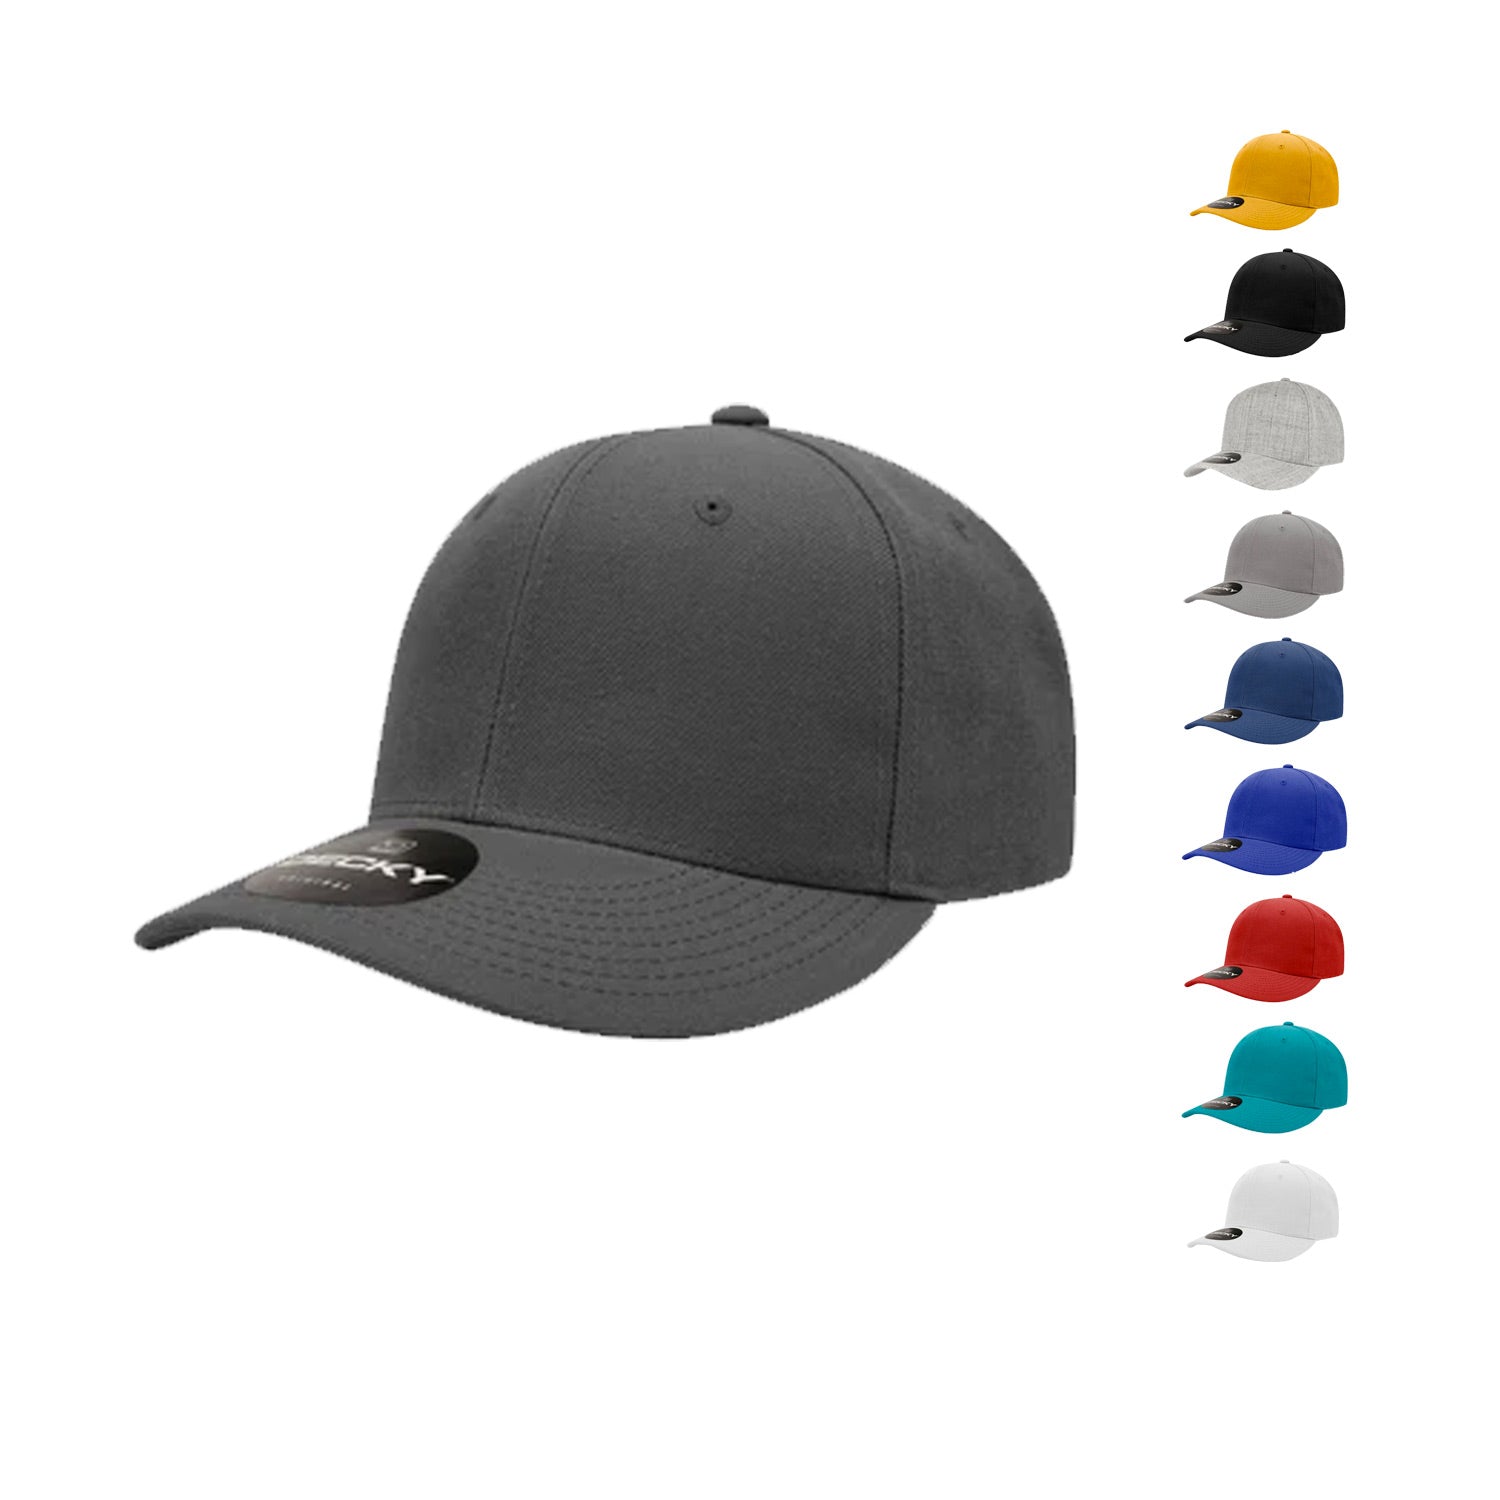 Decky 1040 Trucker Blank Profile 5 Structured High Hats Panel Snapback Caps